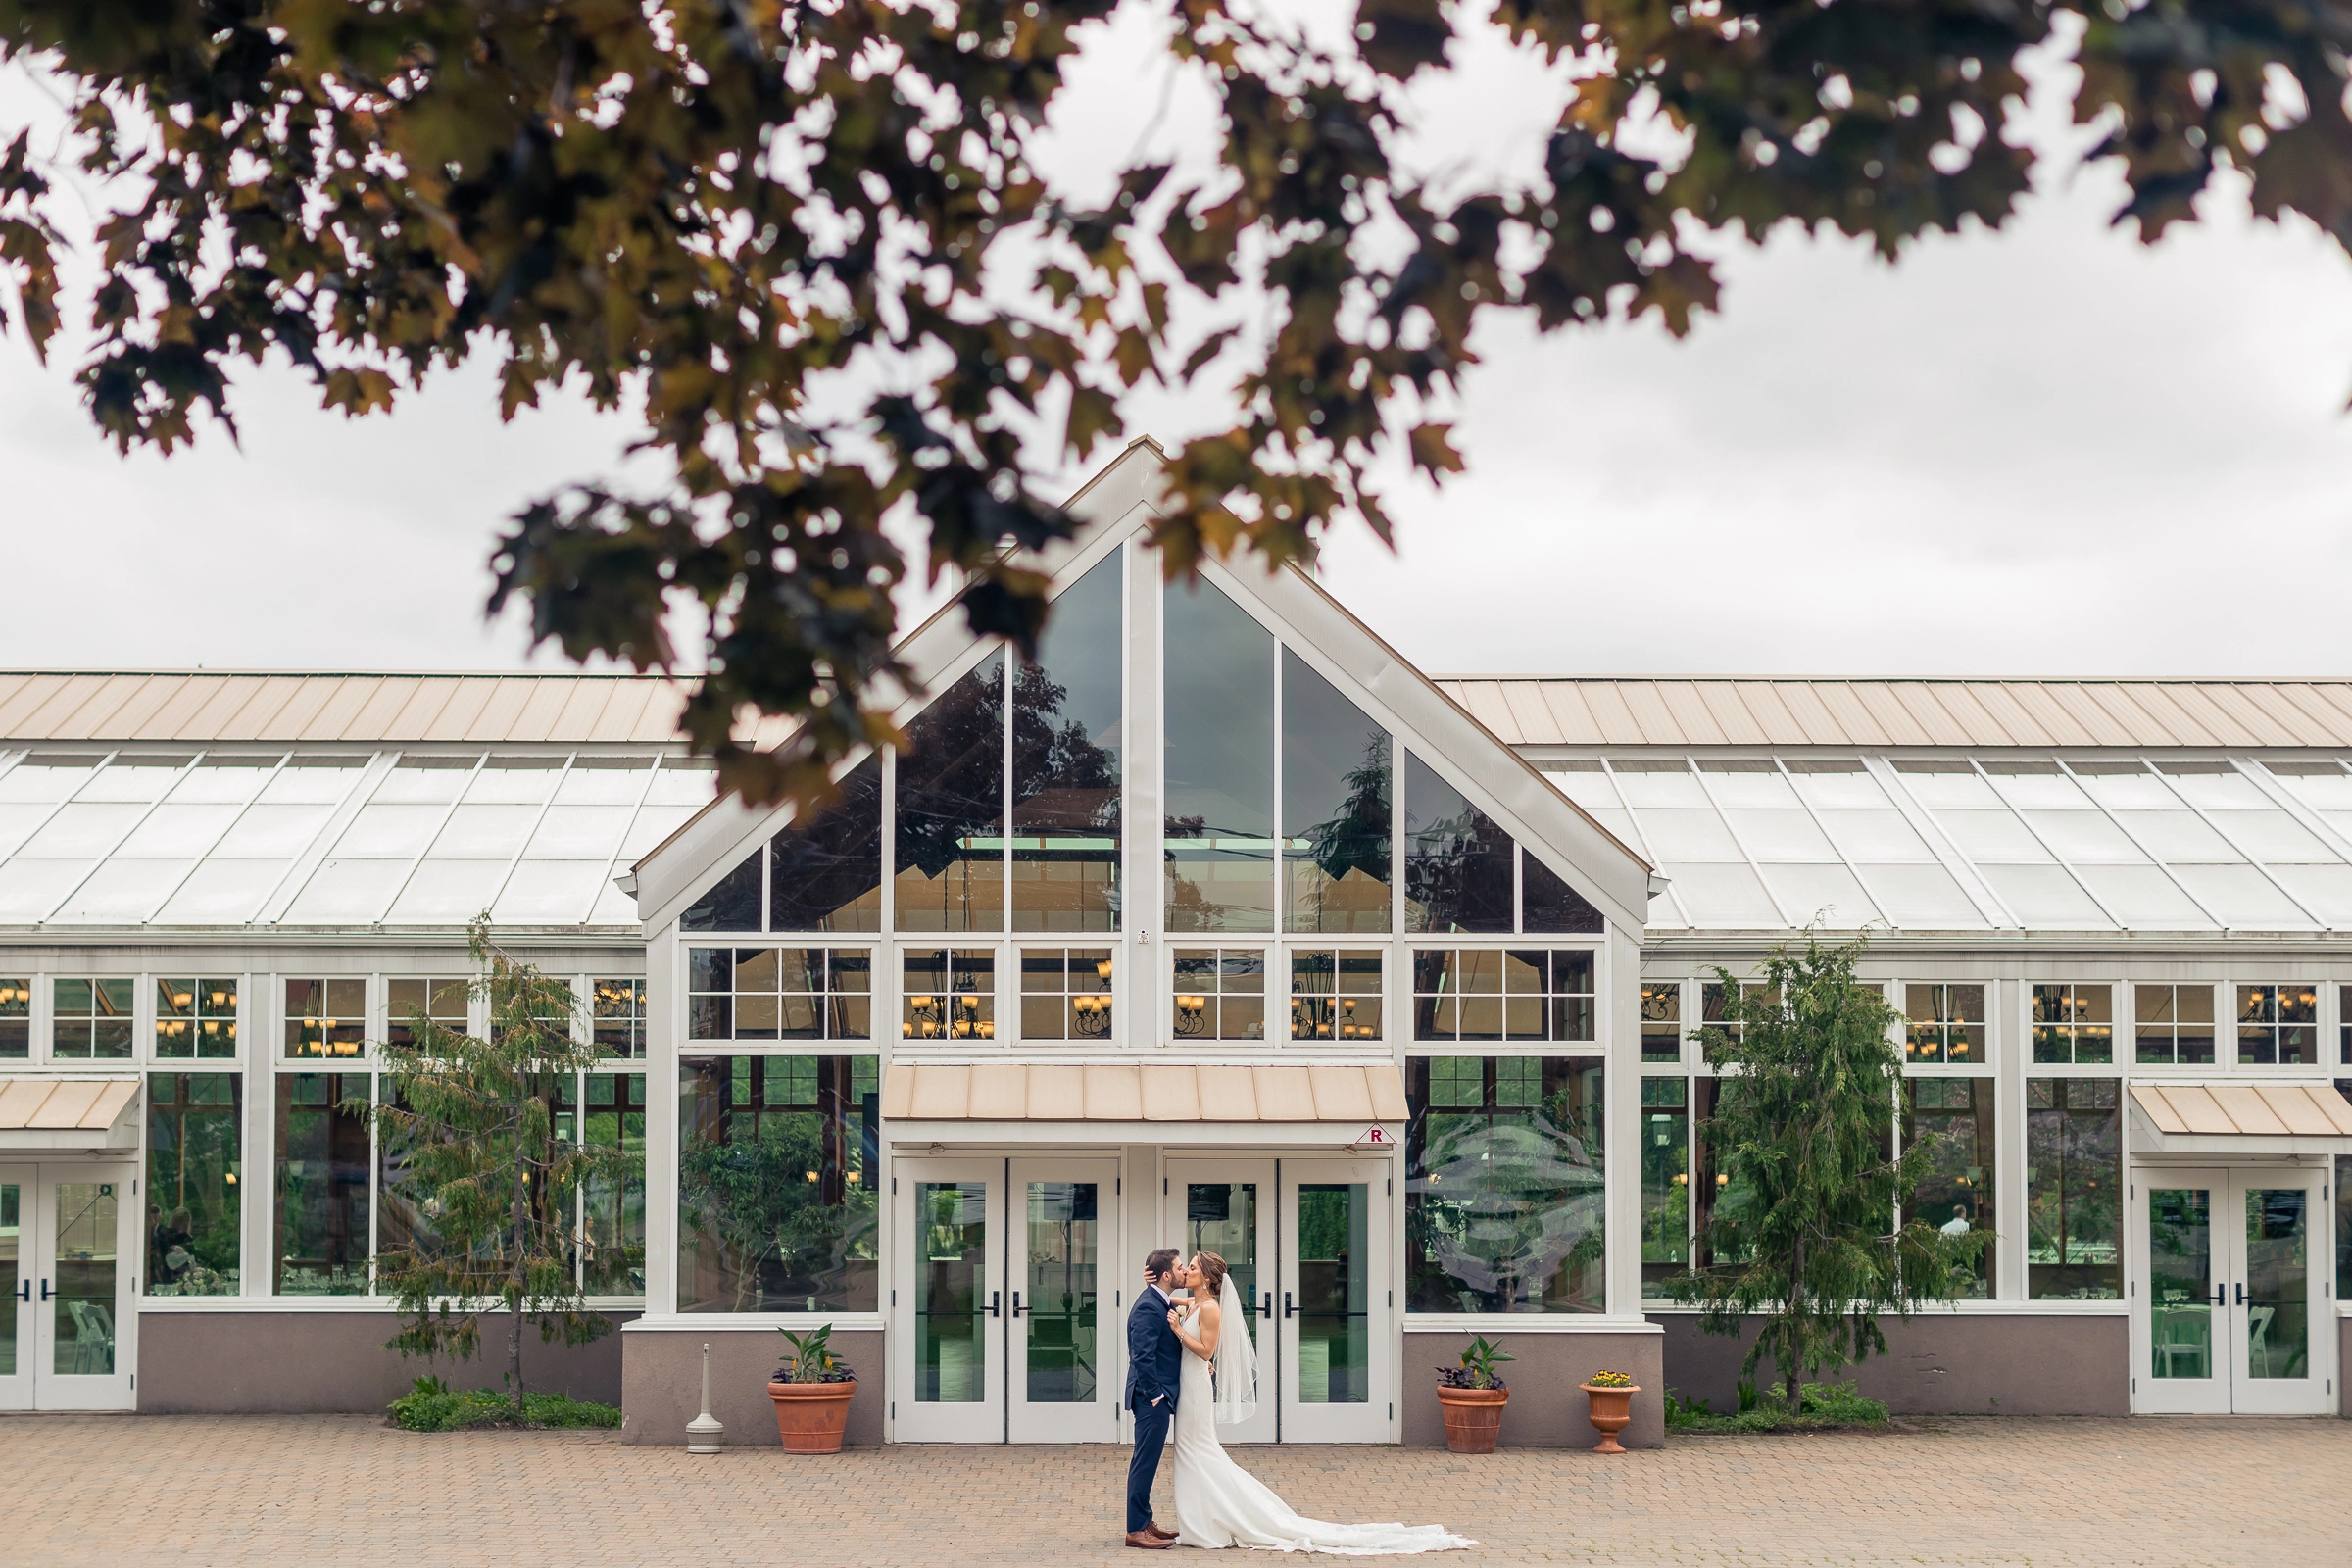 Romantic NJ wedding venues at Sussex County Conservatory